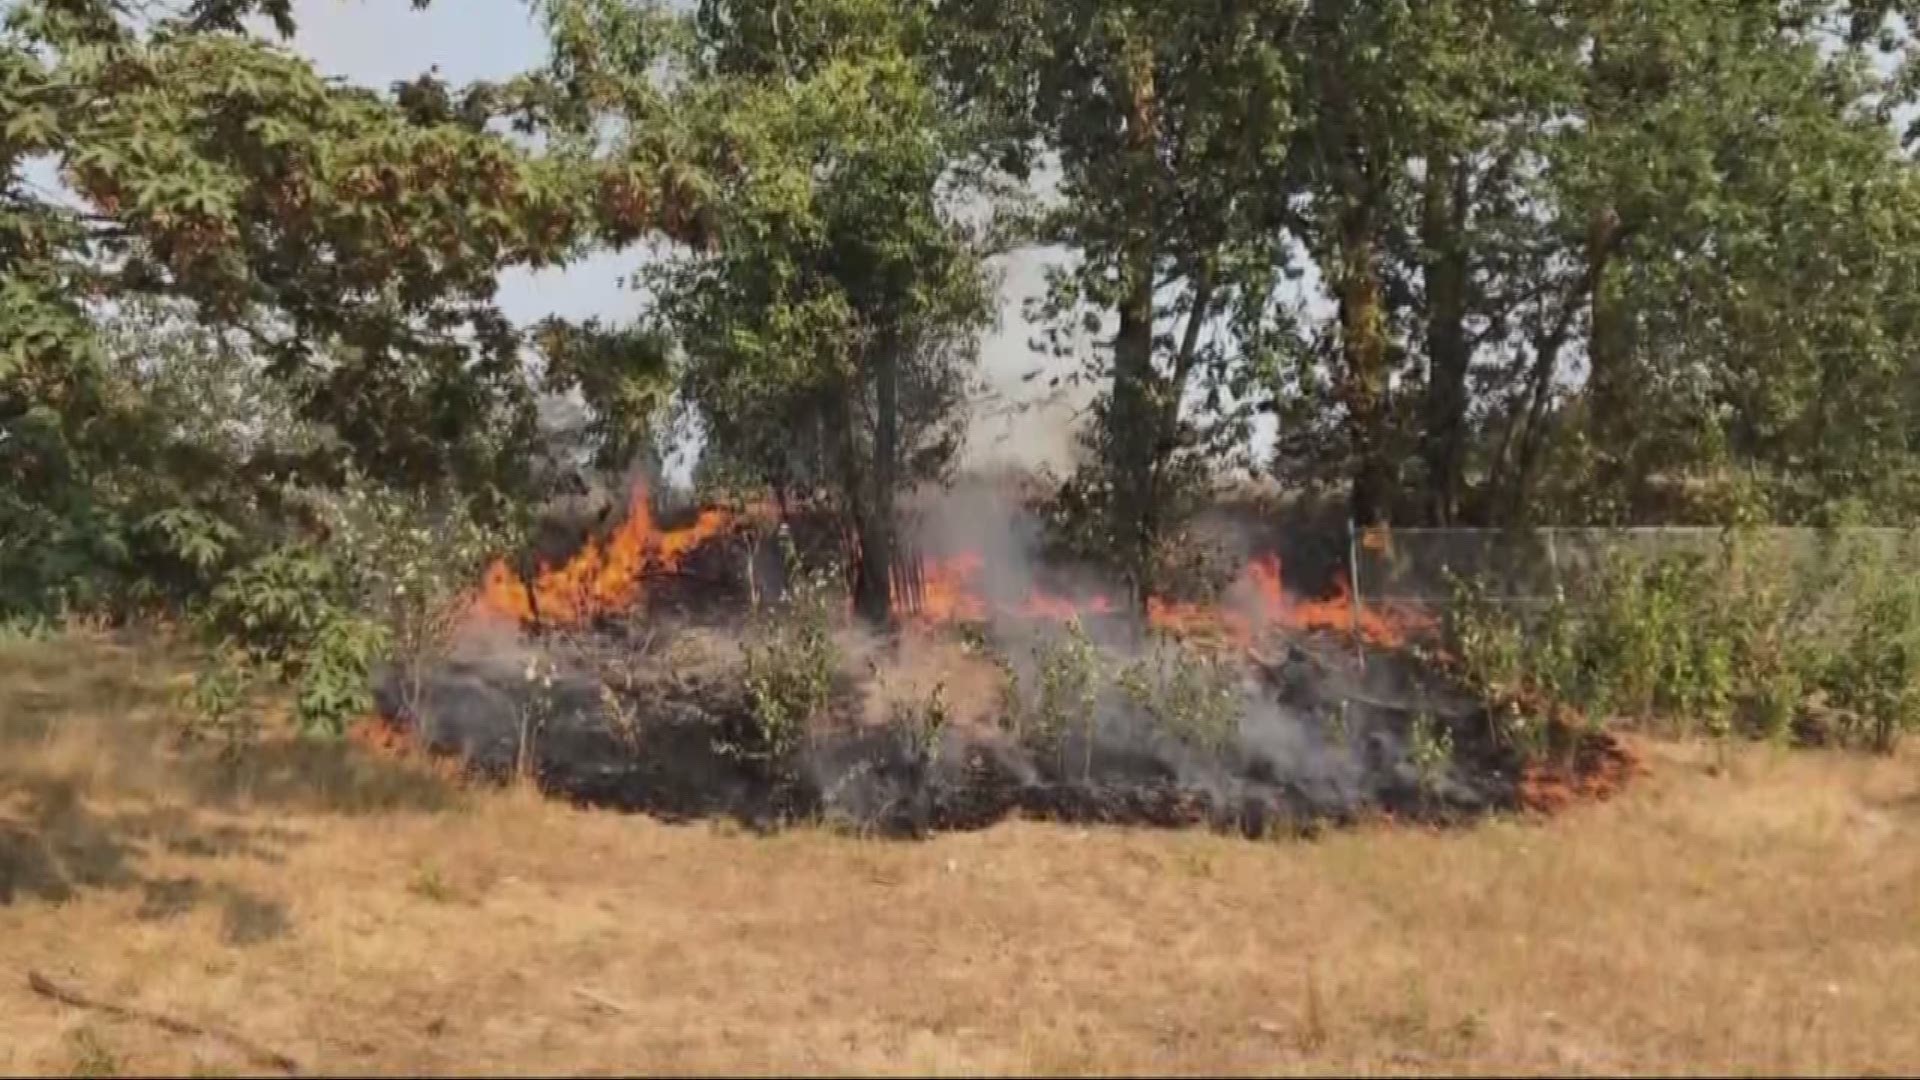 Fire crews say an uptick in grass fires along freeway is worrisome. Several recent ones in Portland were caused by the homelees. Others may have been a discarded cigarette butt.